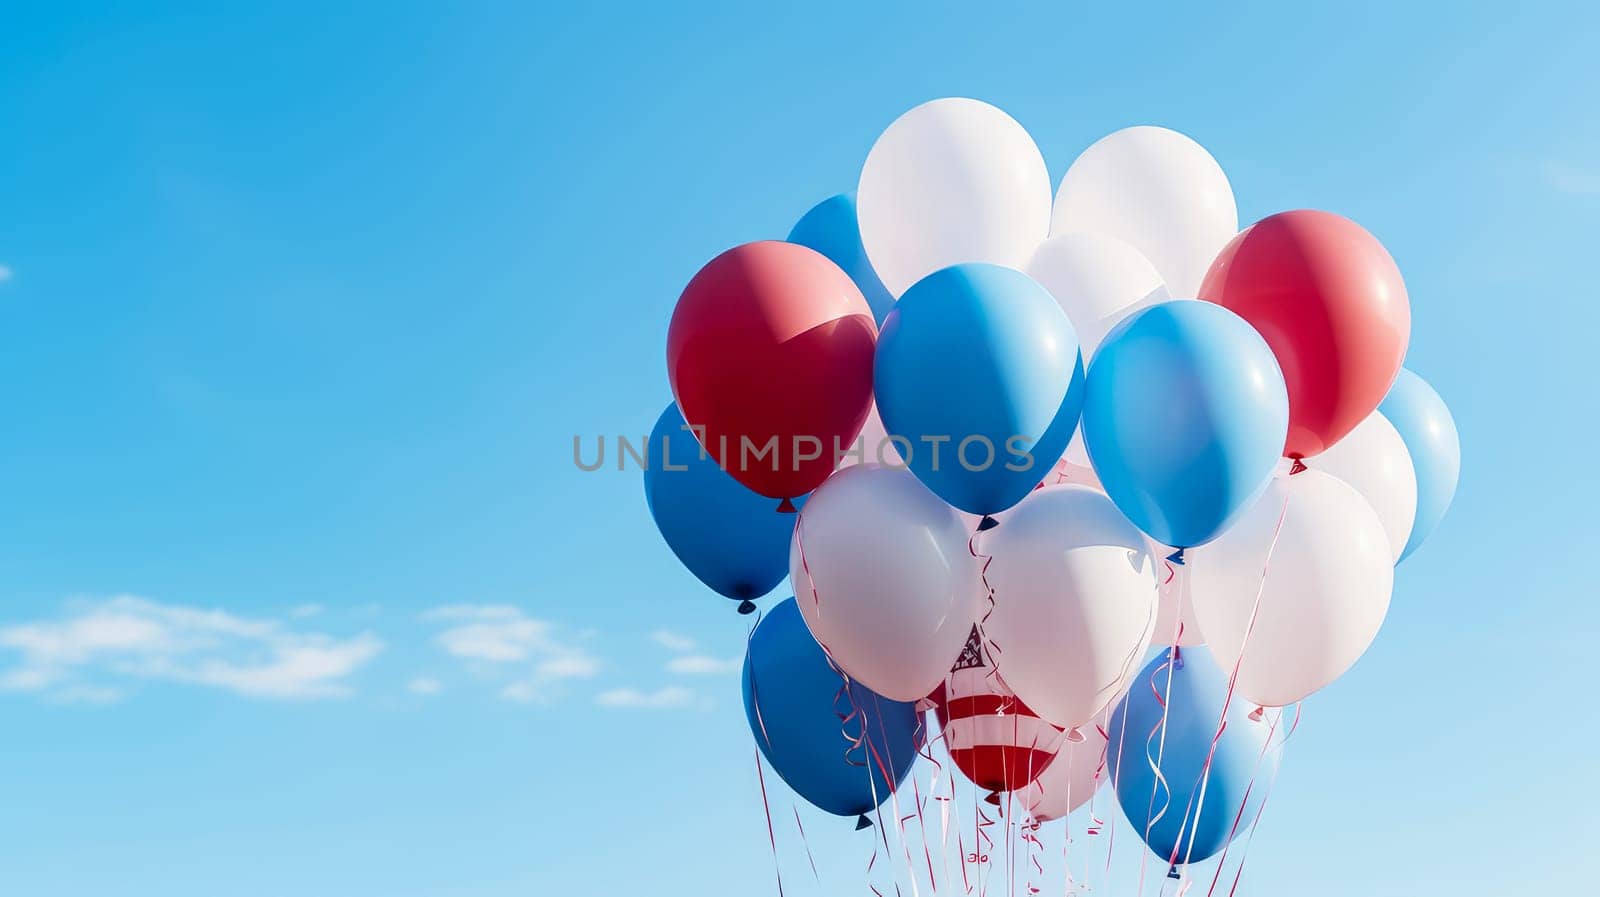 Balloons in the colors of the United States of America flag float against the blue sky. by Alla_Yurtayeva